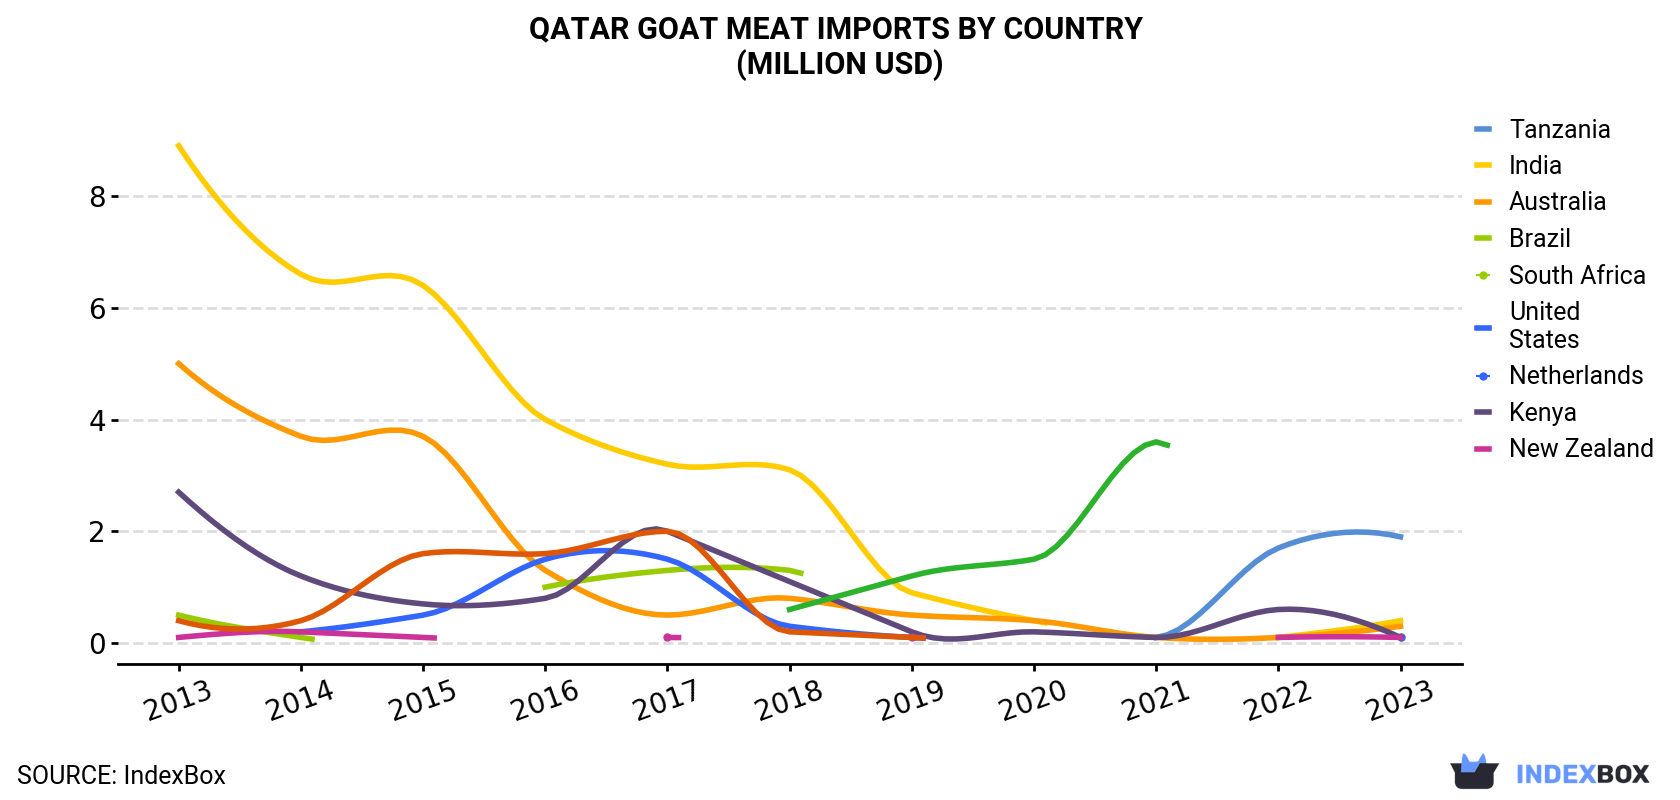 Qatar Goat Meat Imports By Country (Million USD)